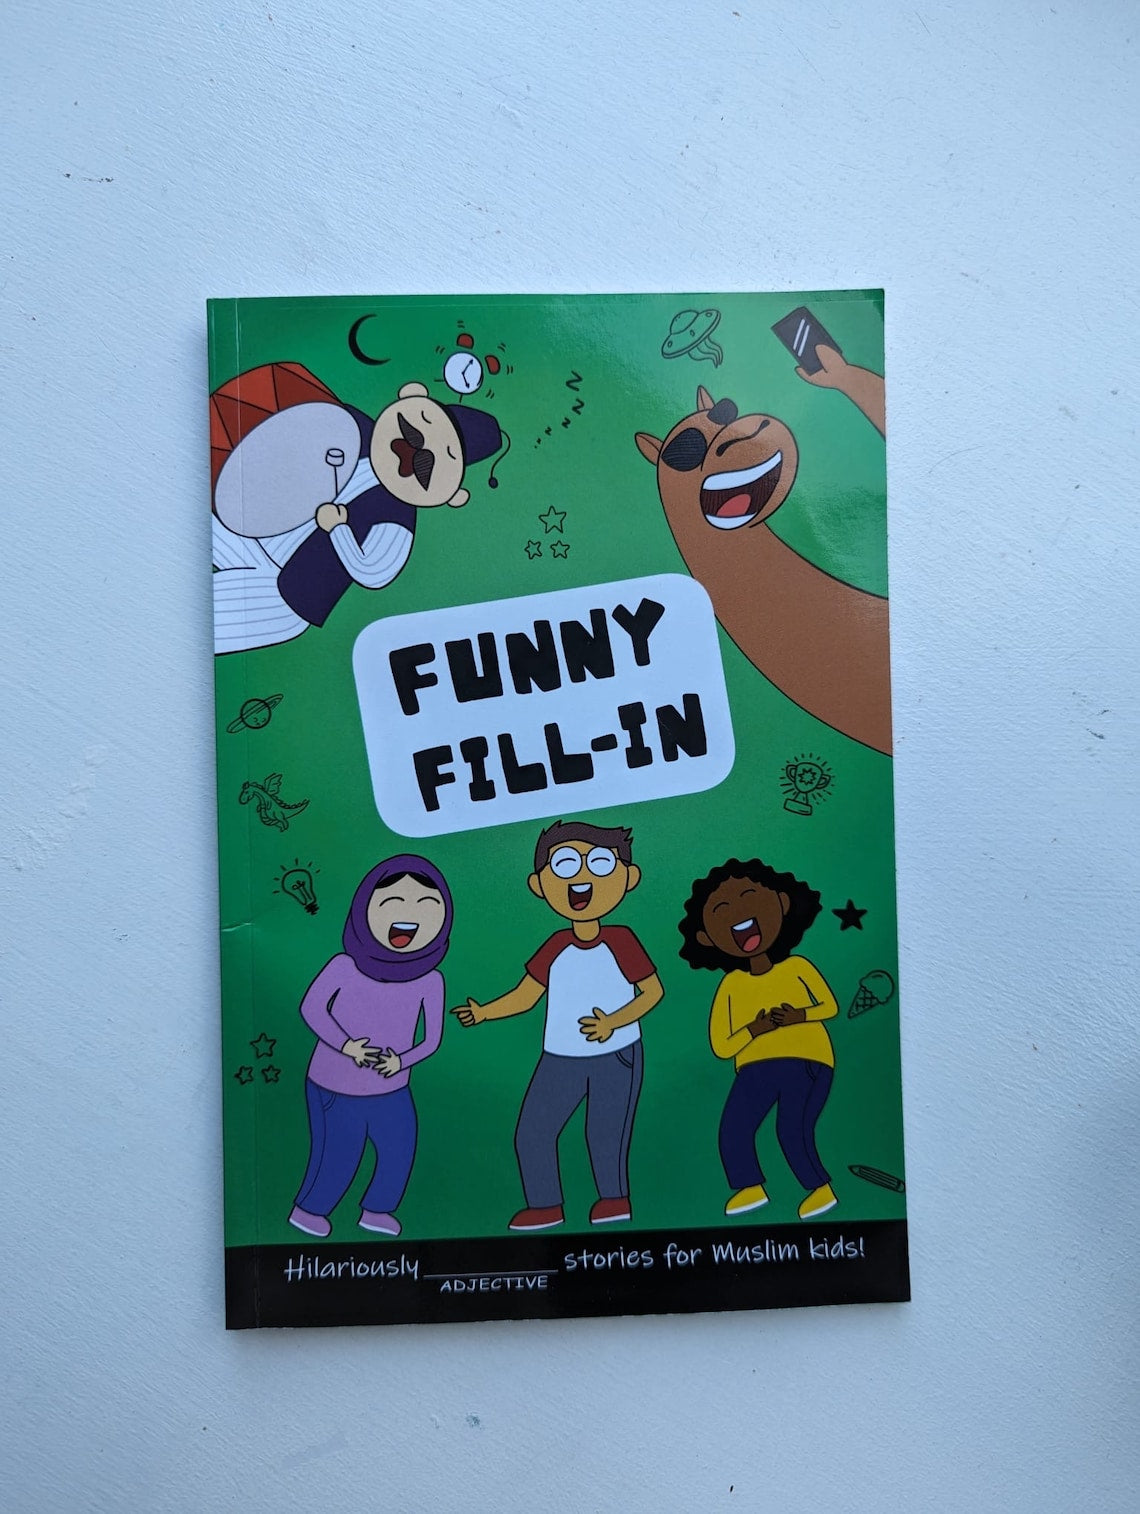 Funny Fill-In: Relatable Stories for Muslim Kids